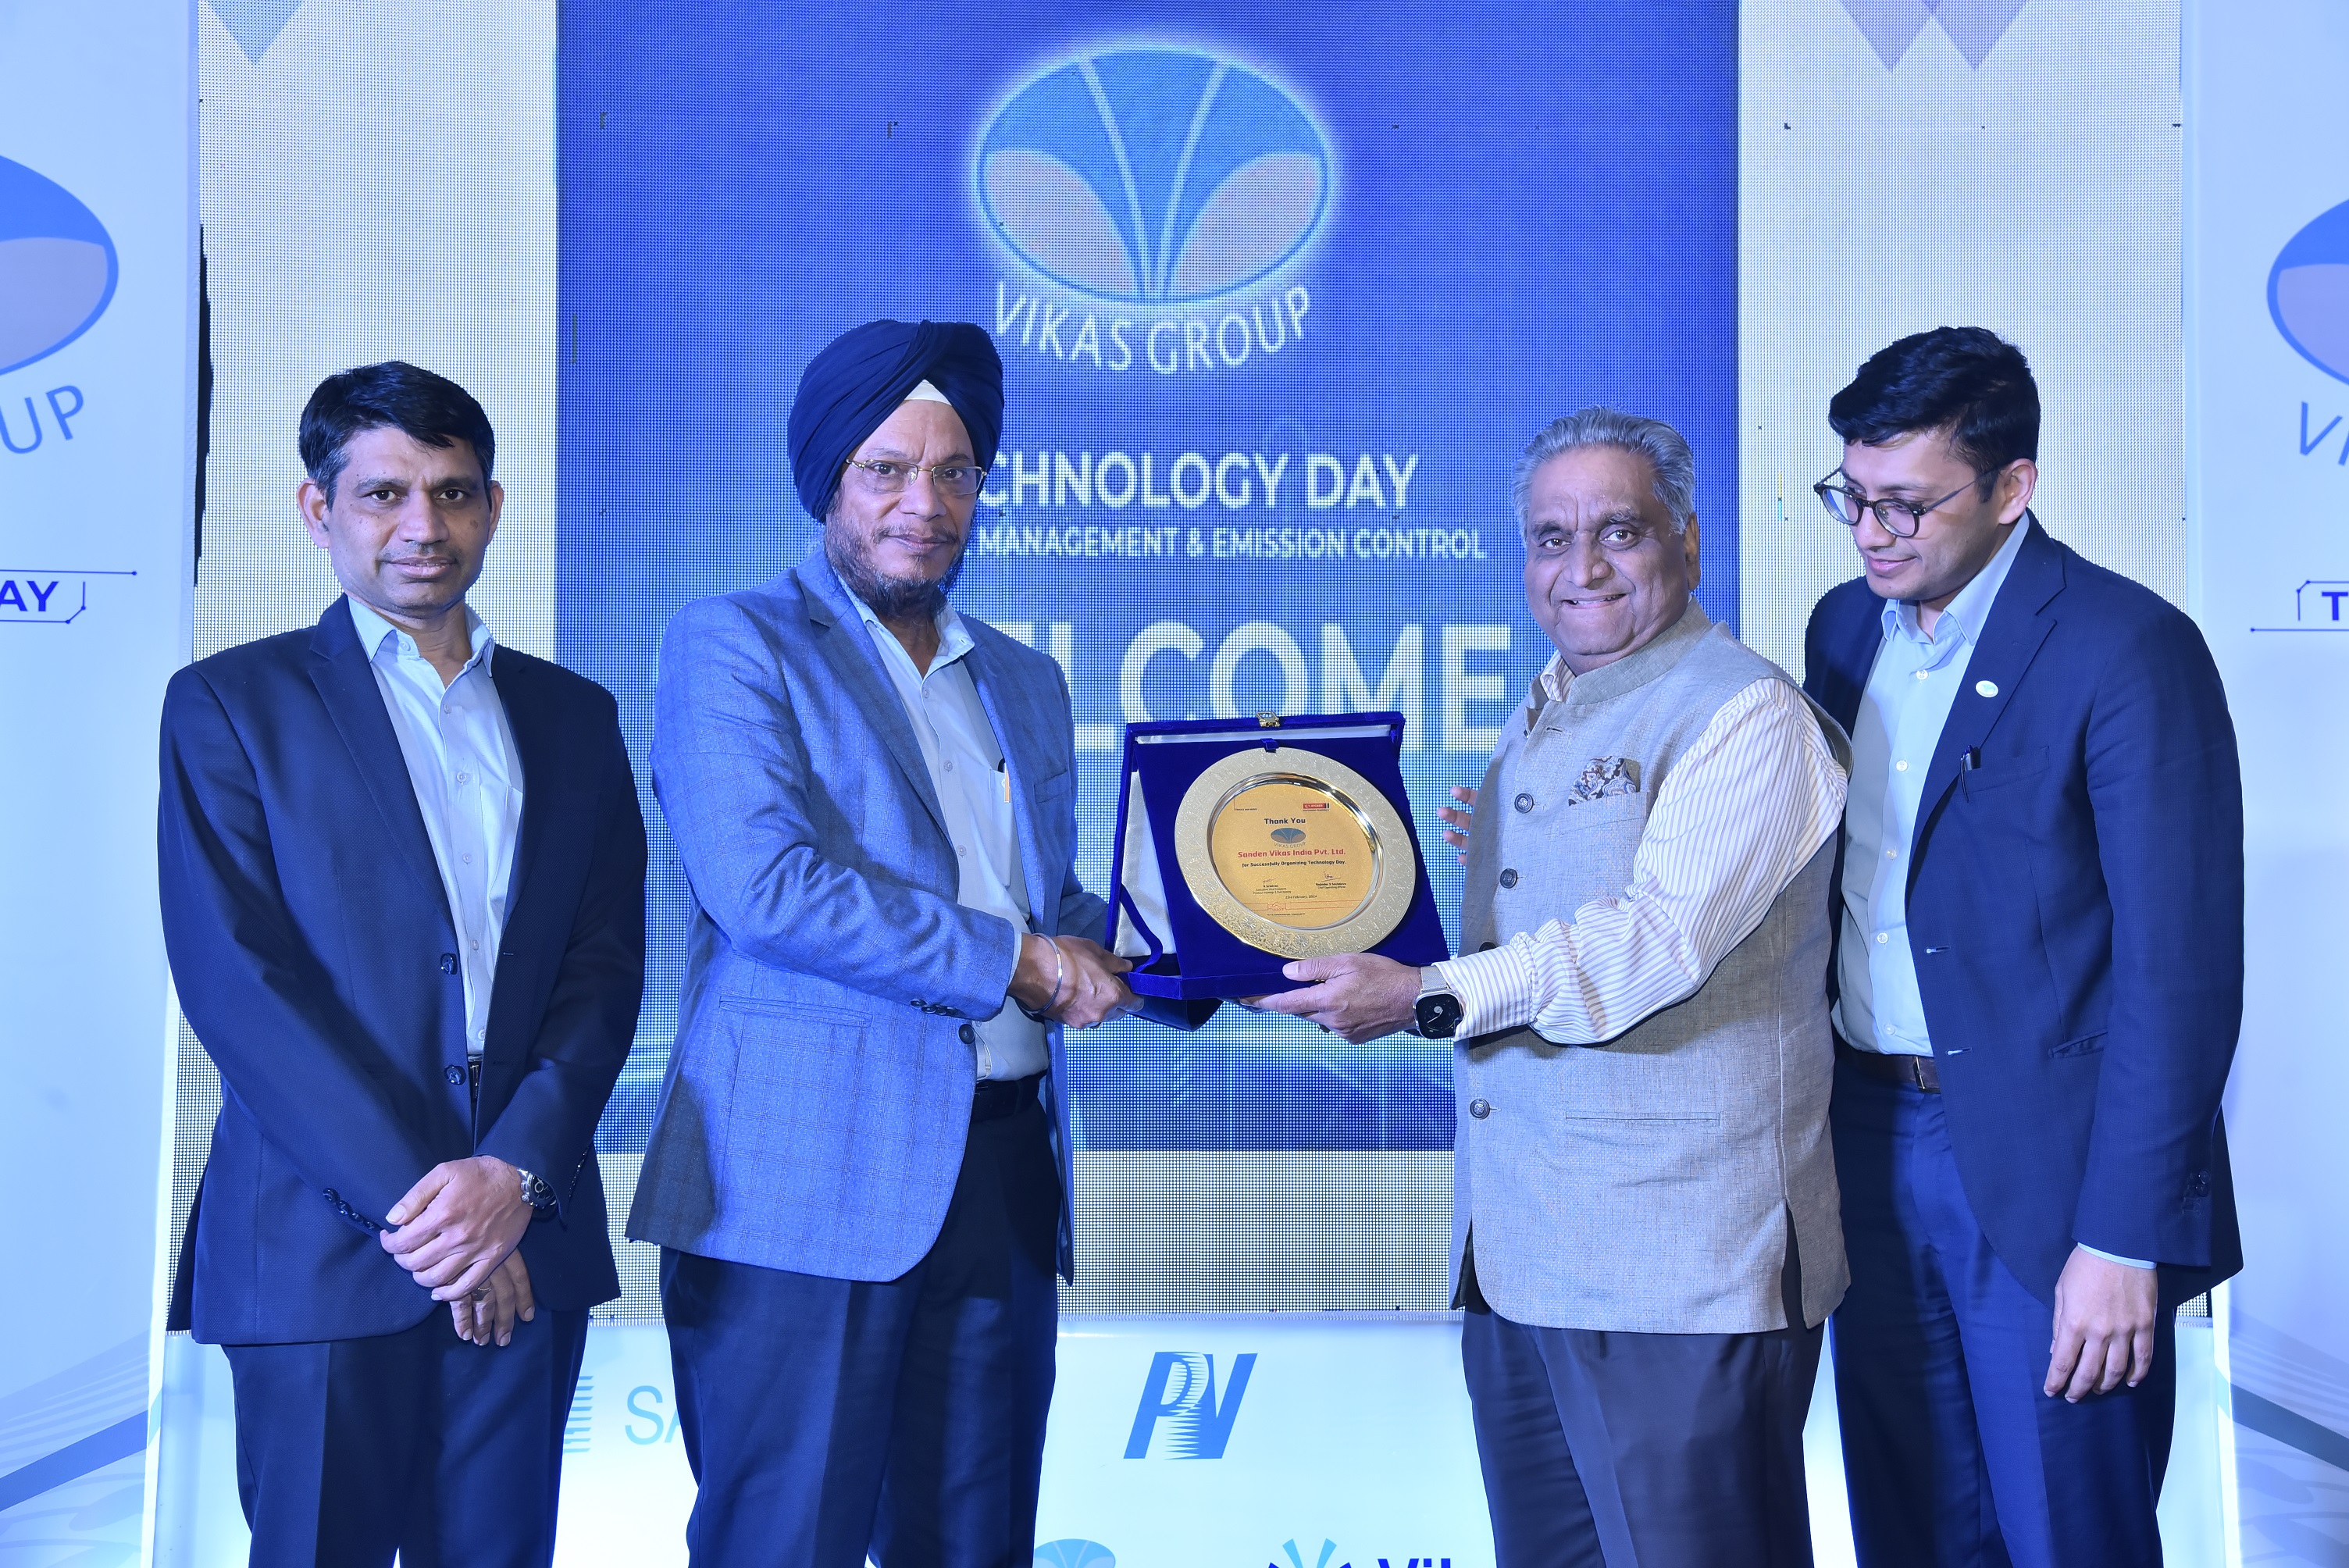 Vikas Group held an exclusive Technology Day for Volvo Eicher.